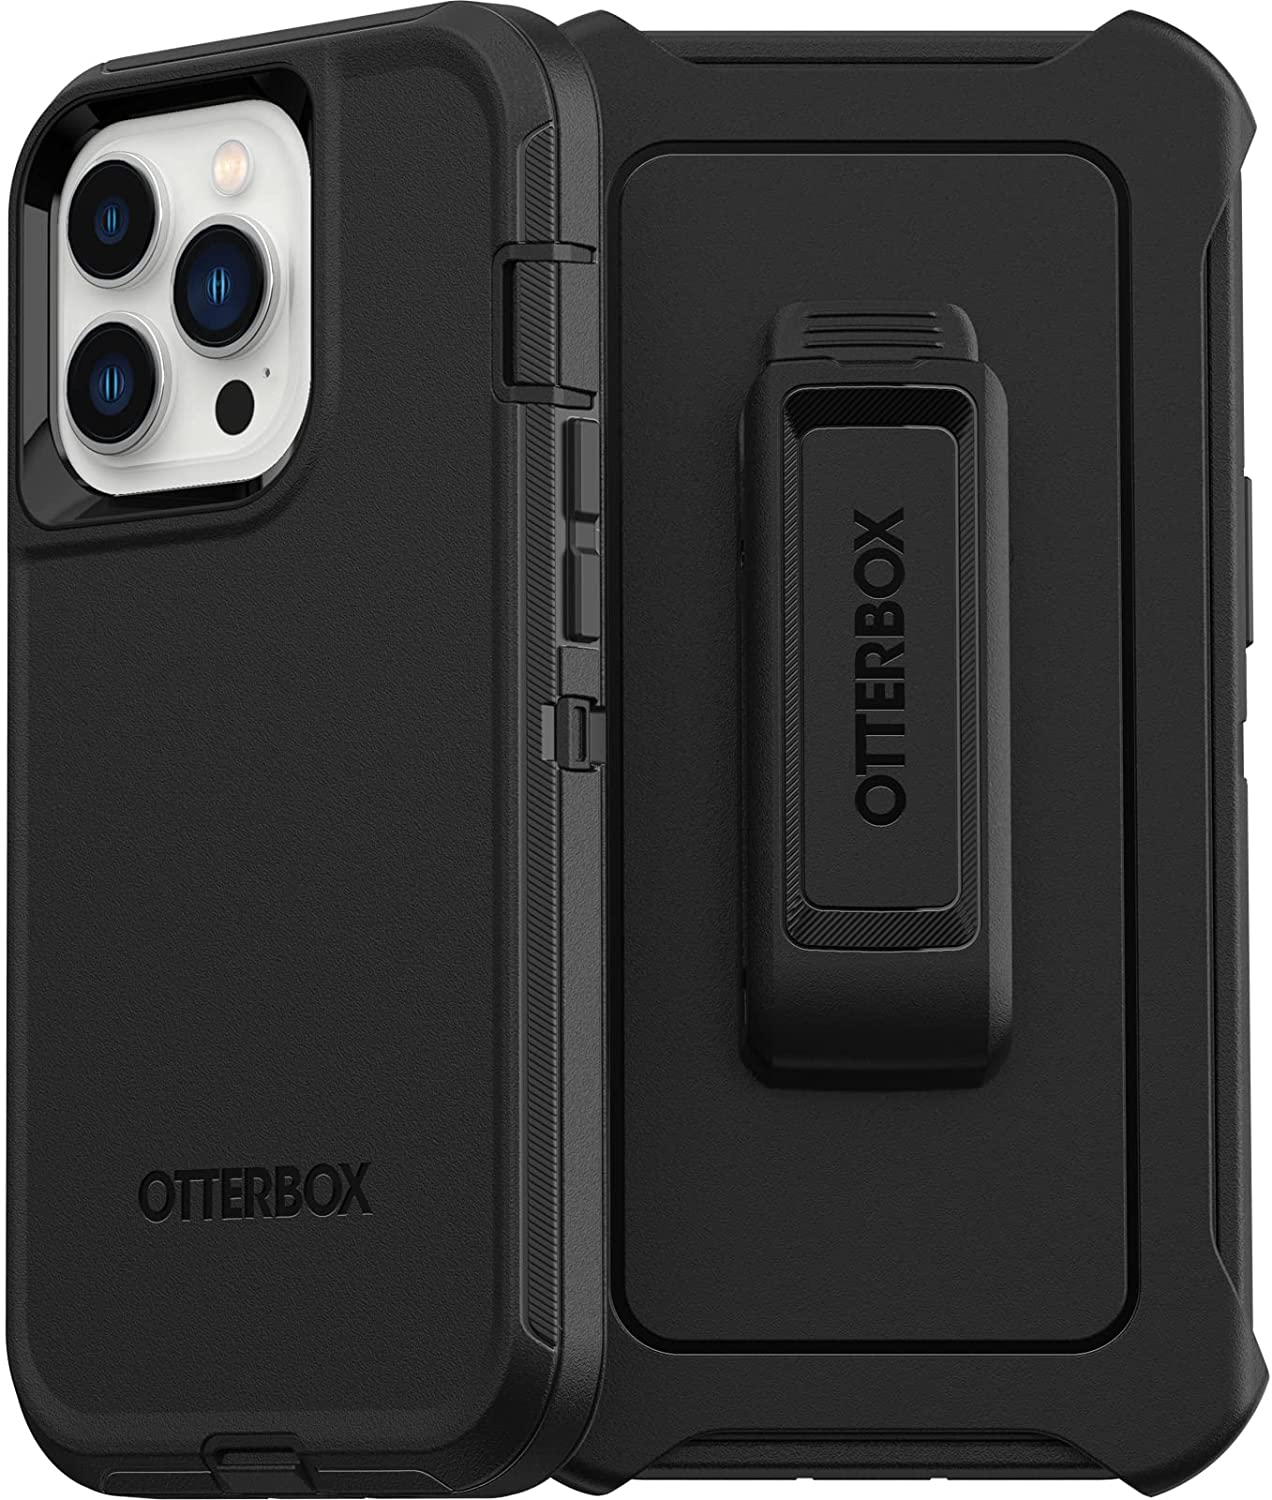 OtterBox DEFENDER SERIES Case for Apple iPhone 13 Pro - Black (New)